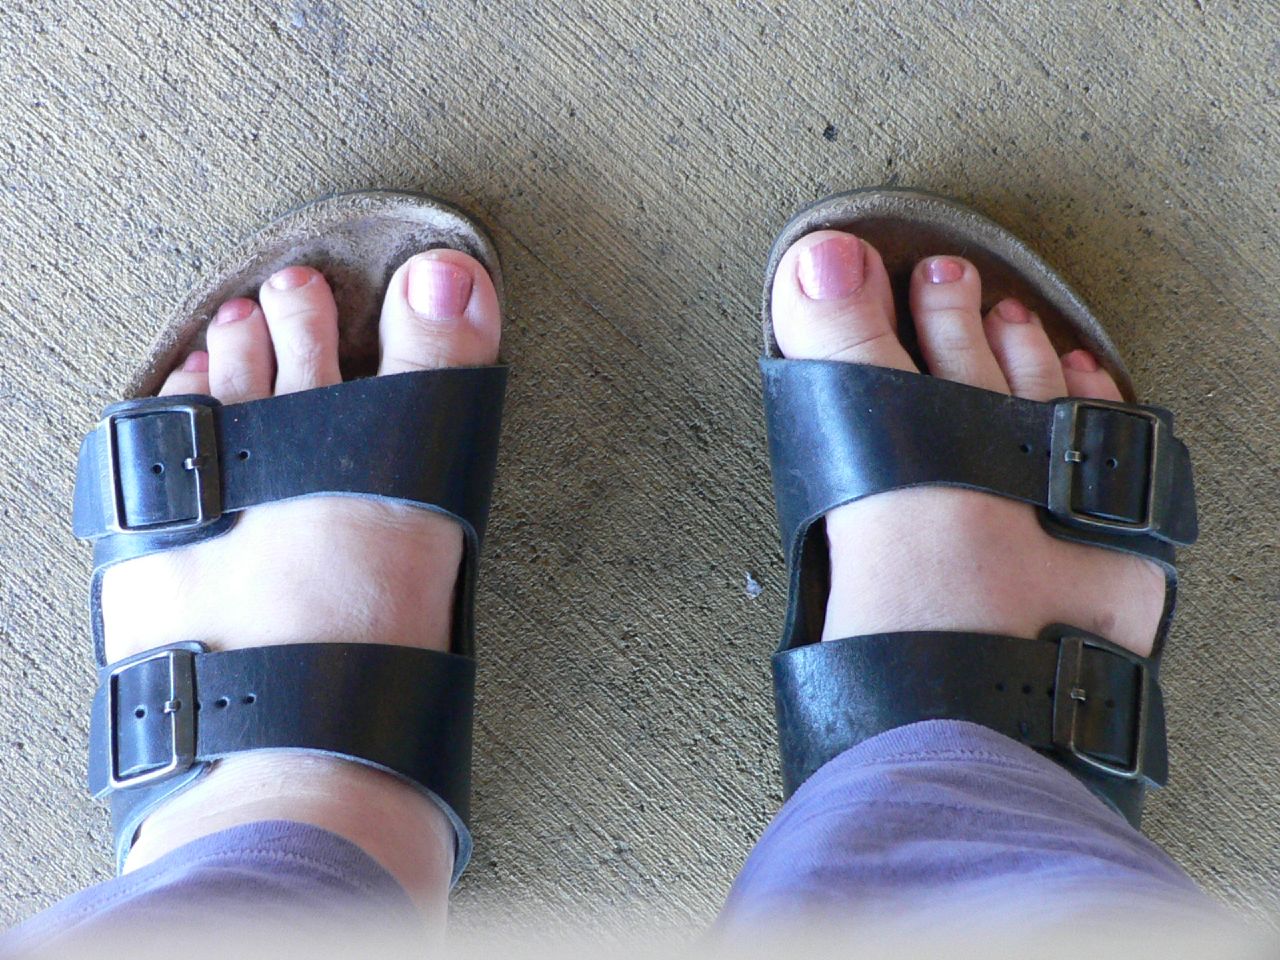 a close up of person wearing sandals and toe wraps